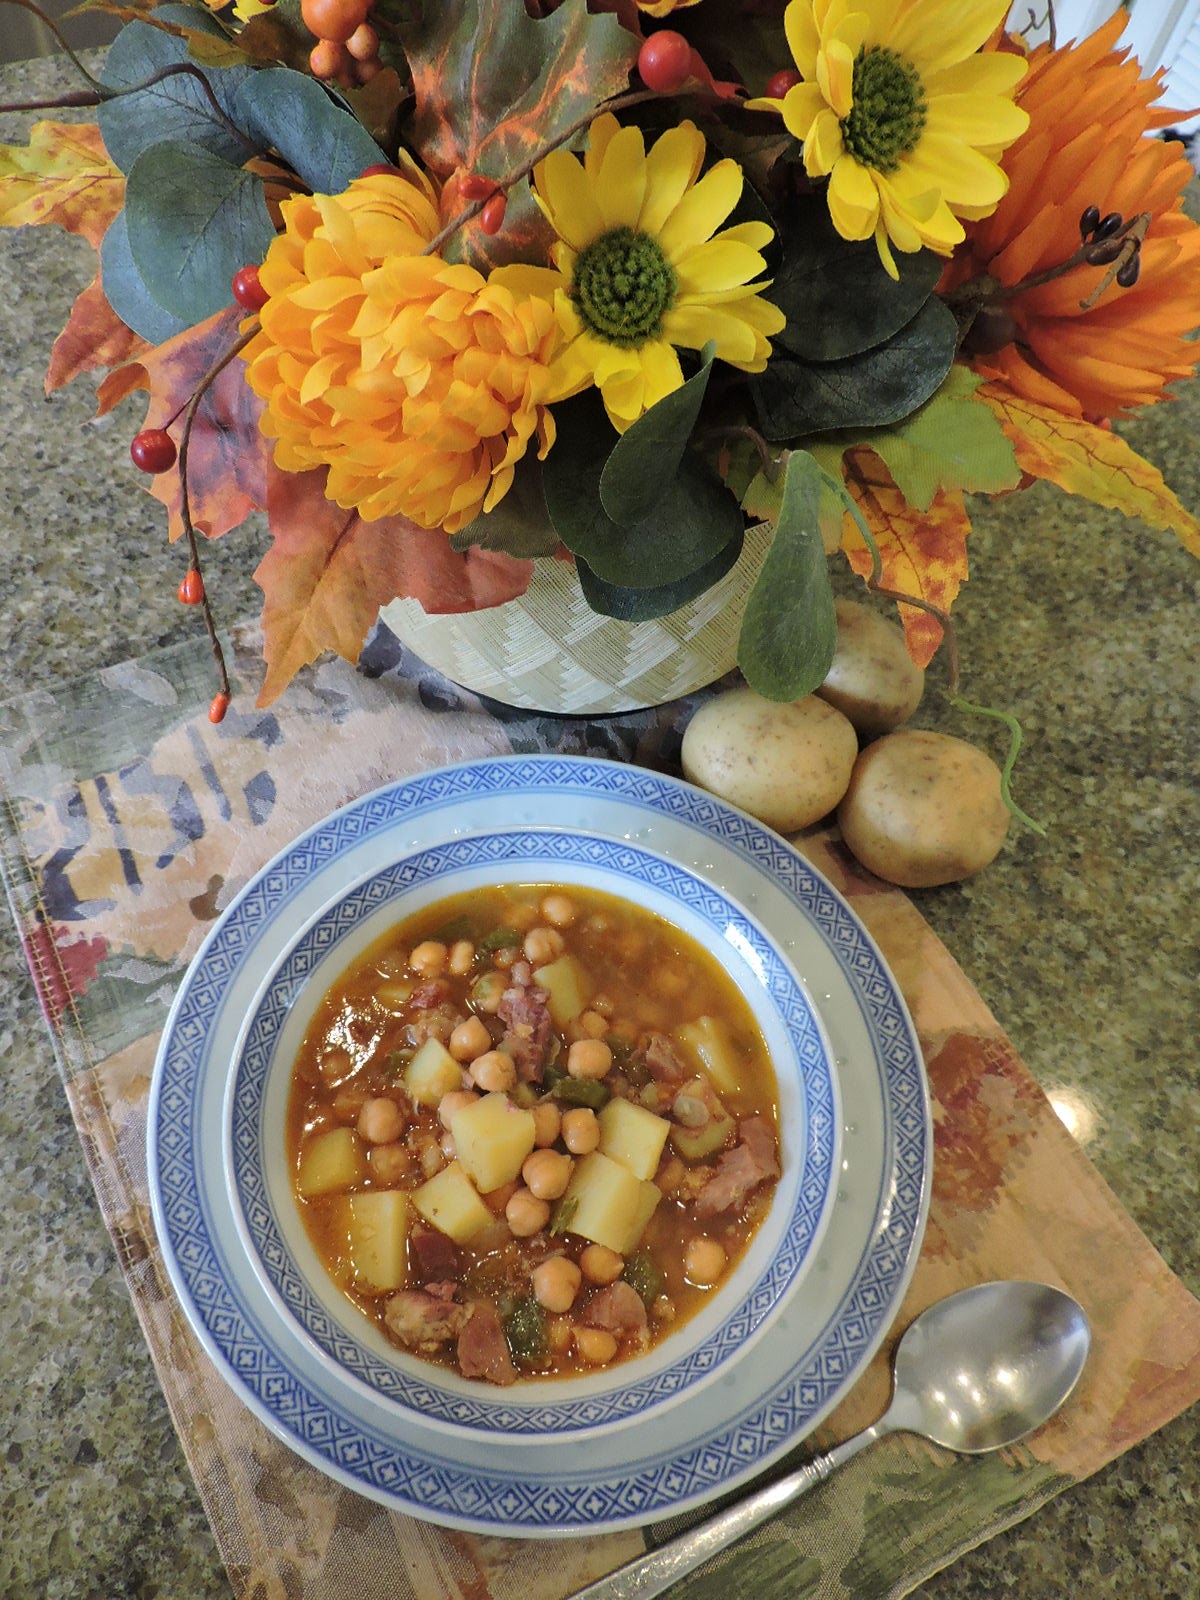 From My Family's Polish Kitchen: Spanish Chickpea Soup